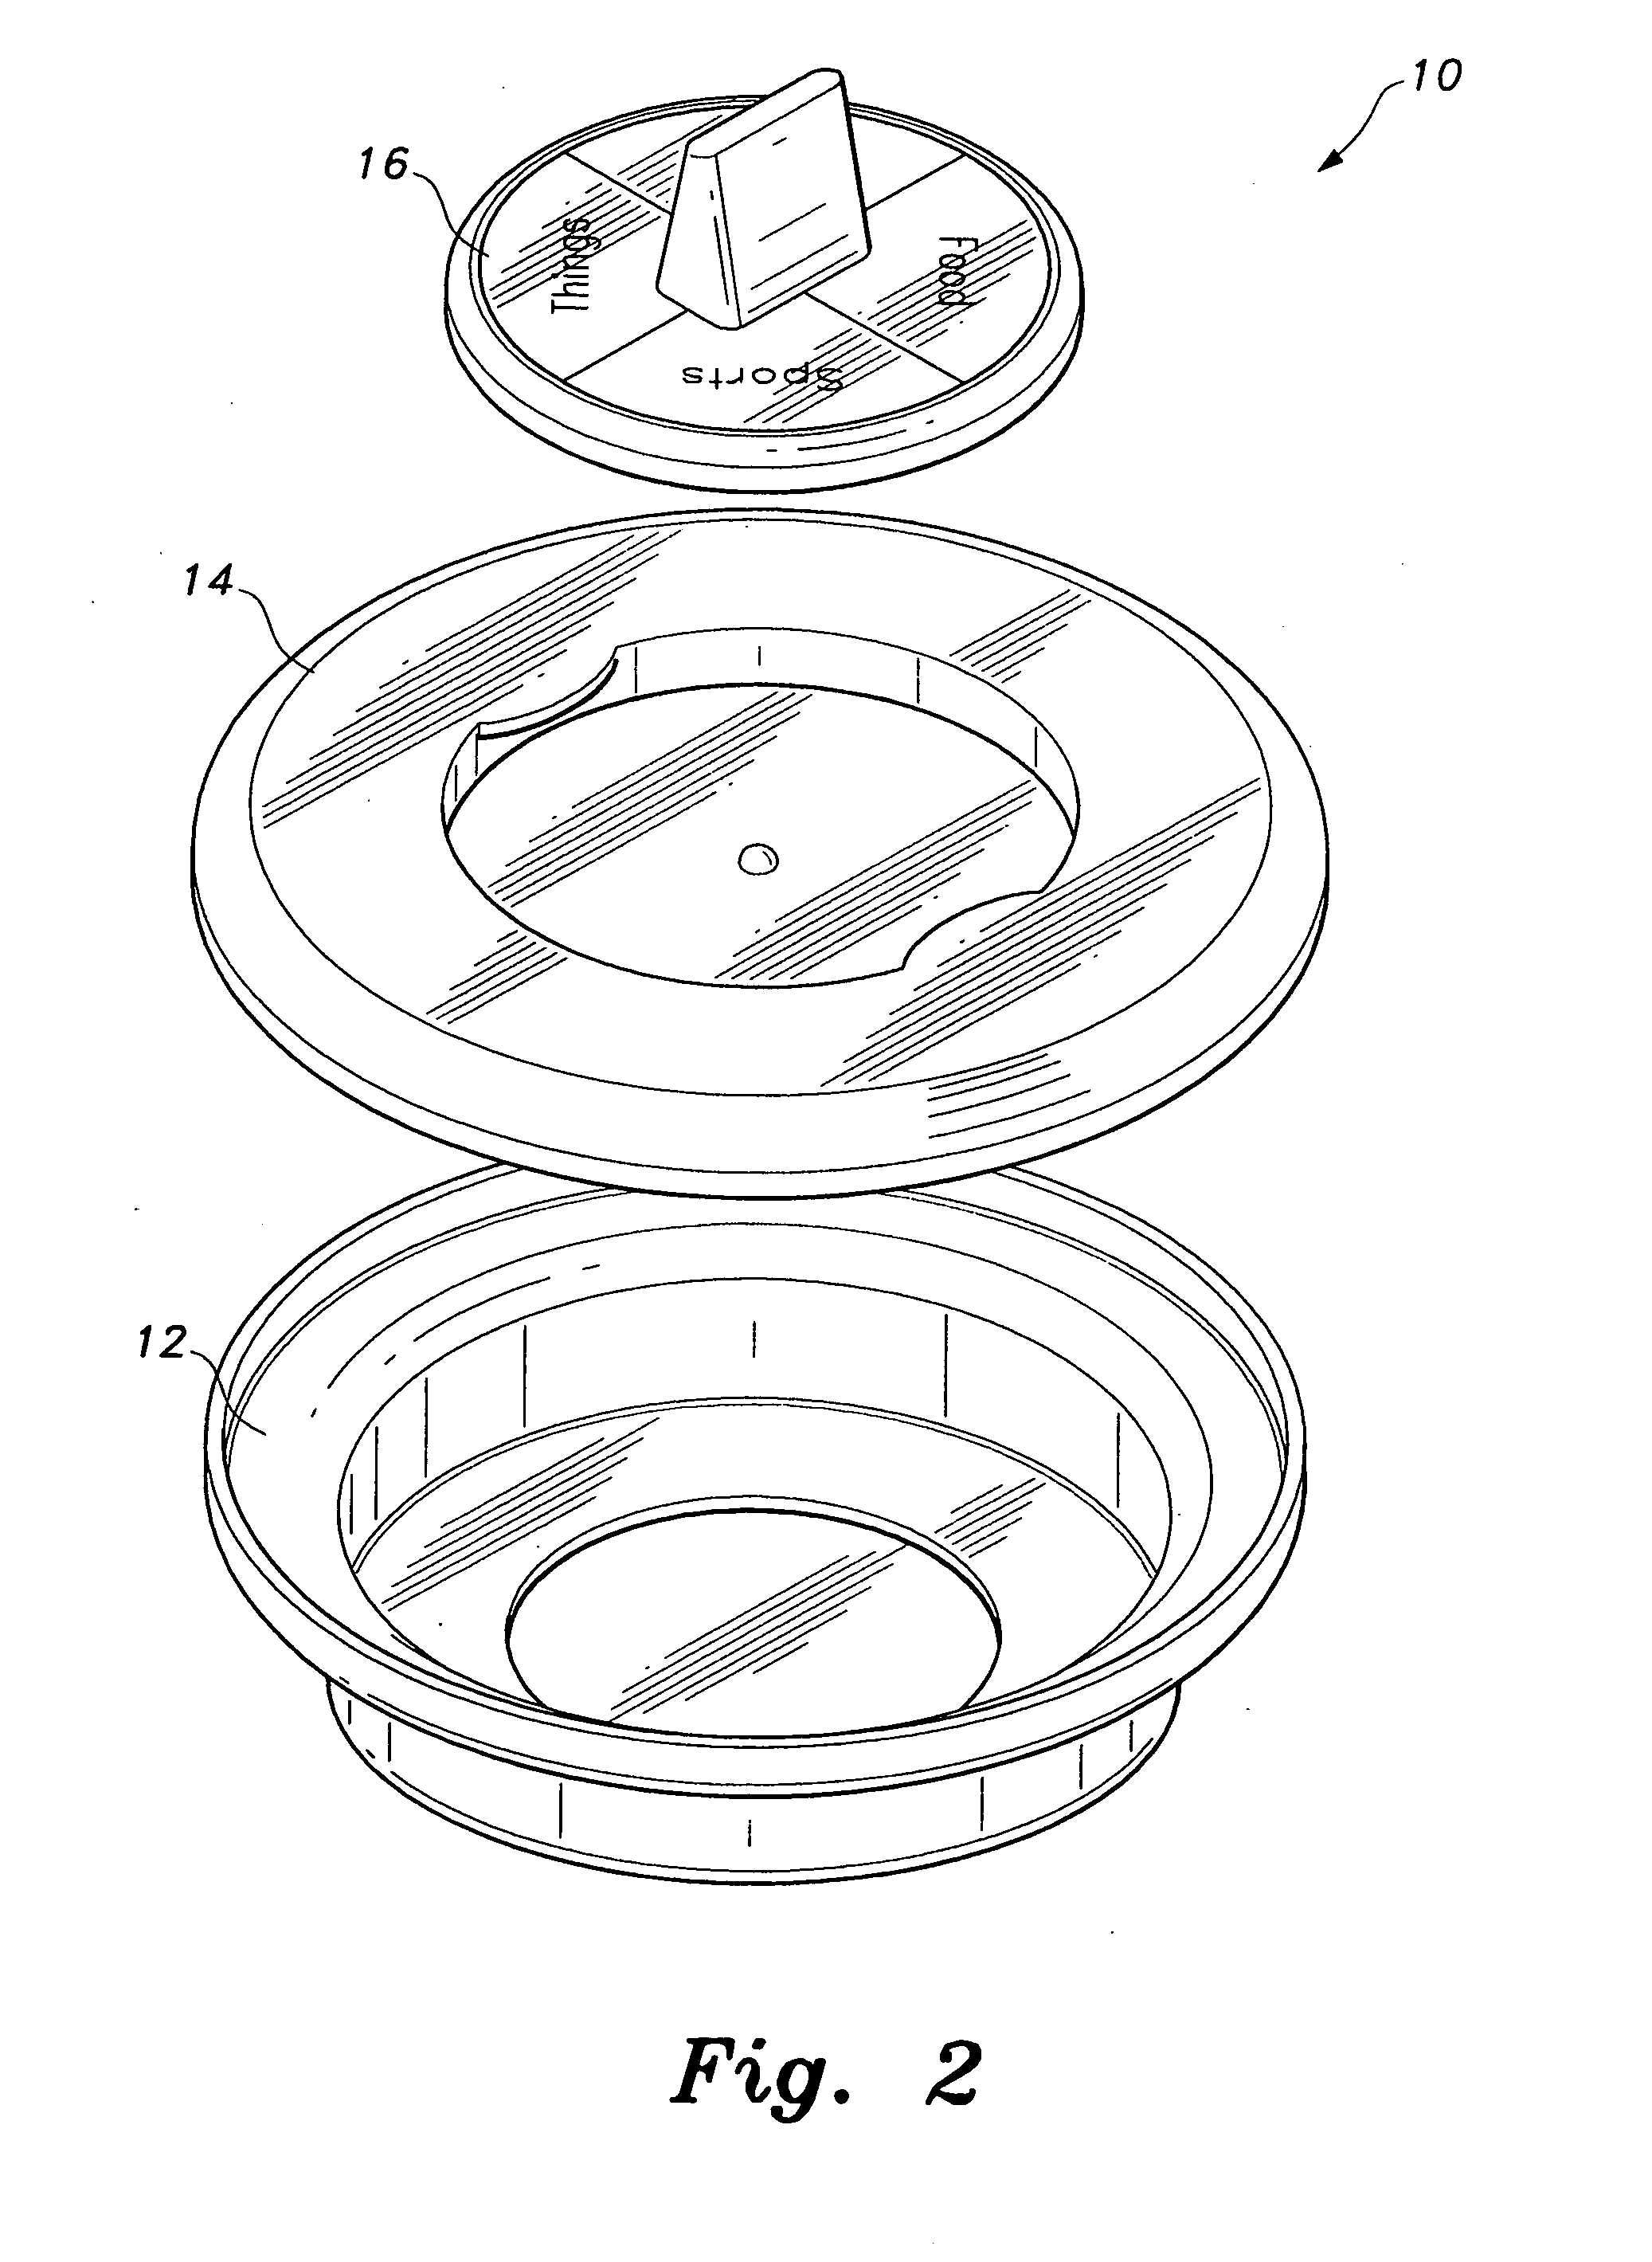 Cup holder game playing apparatus